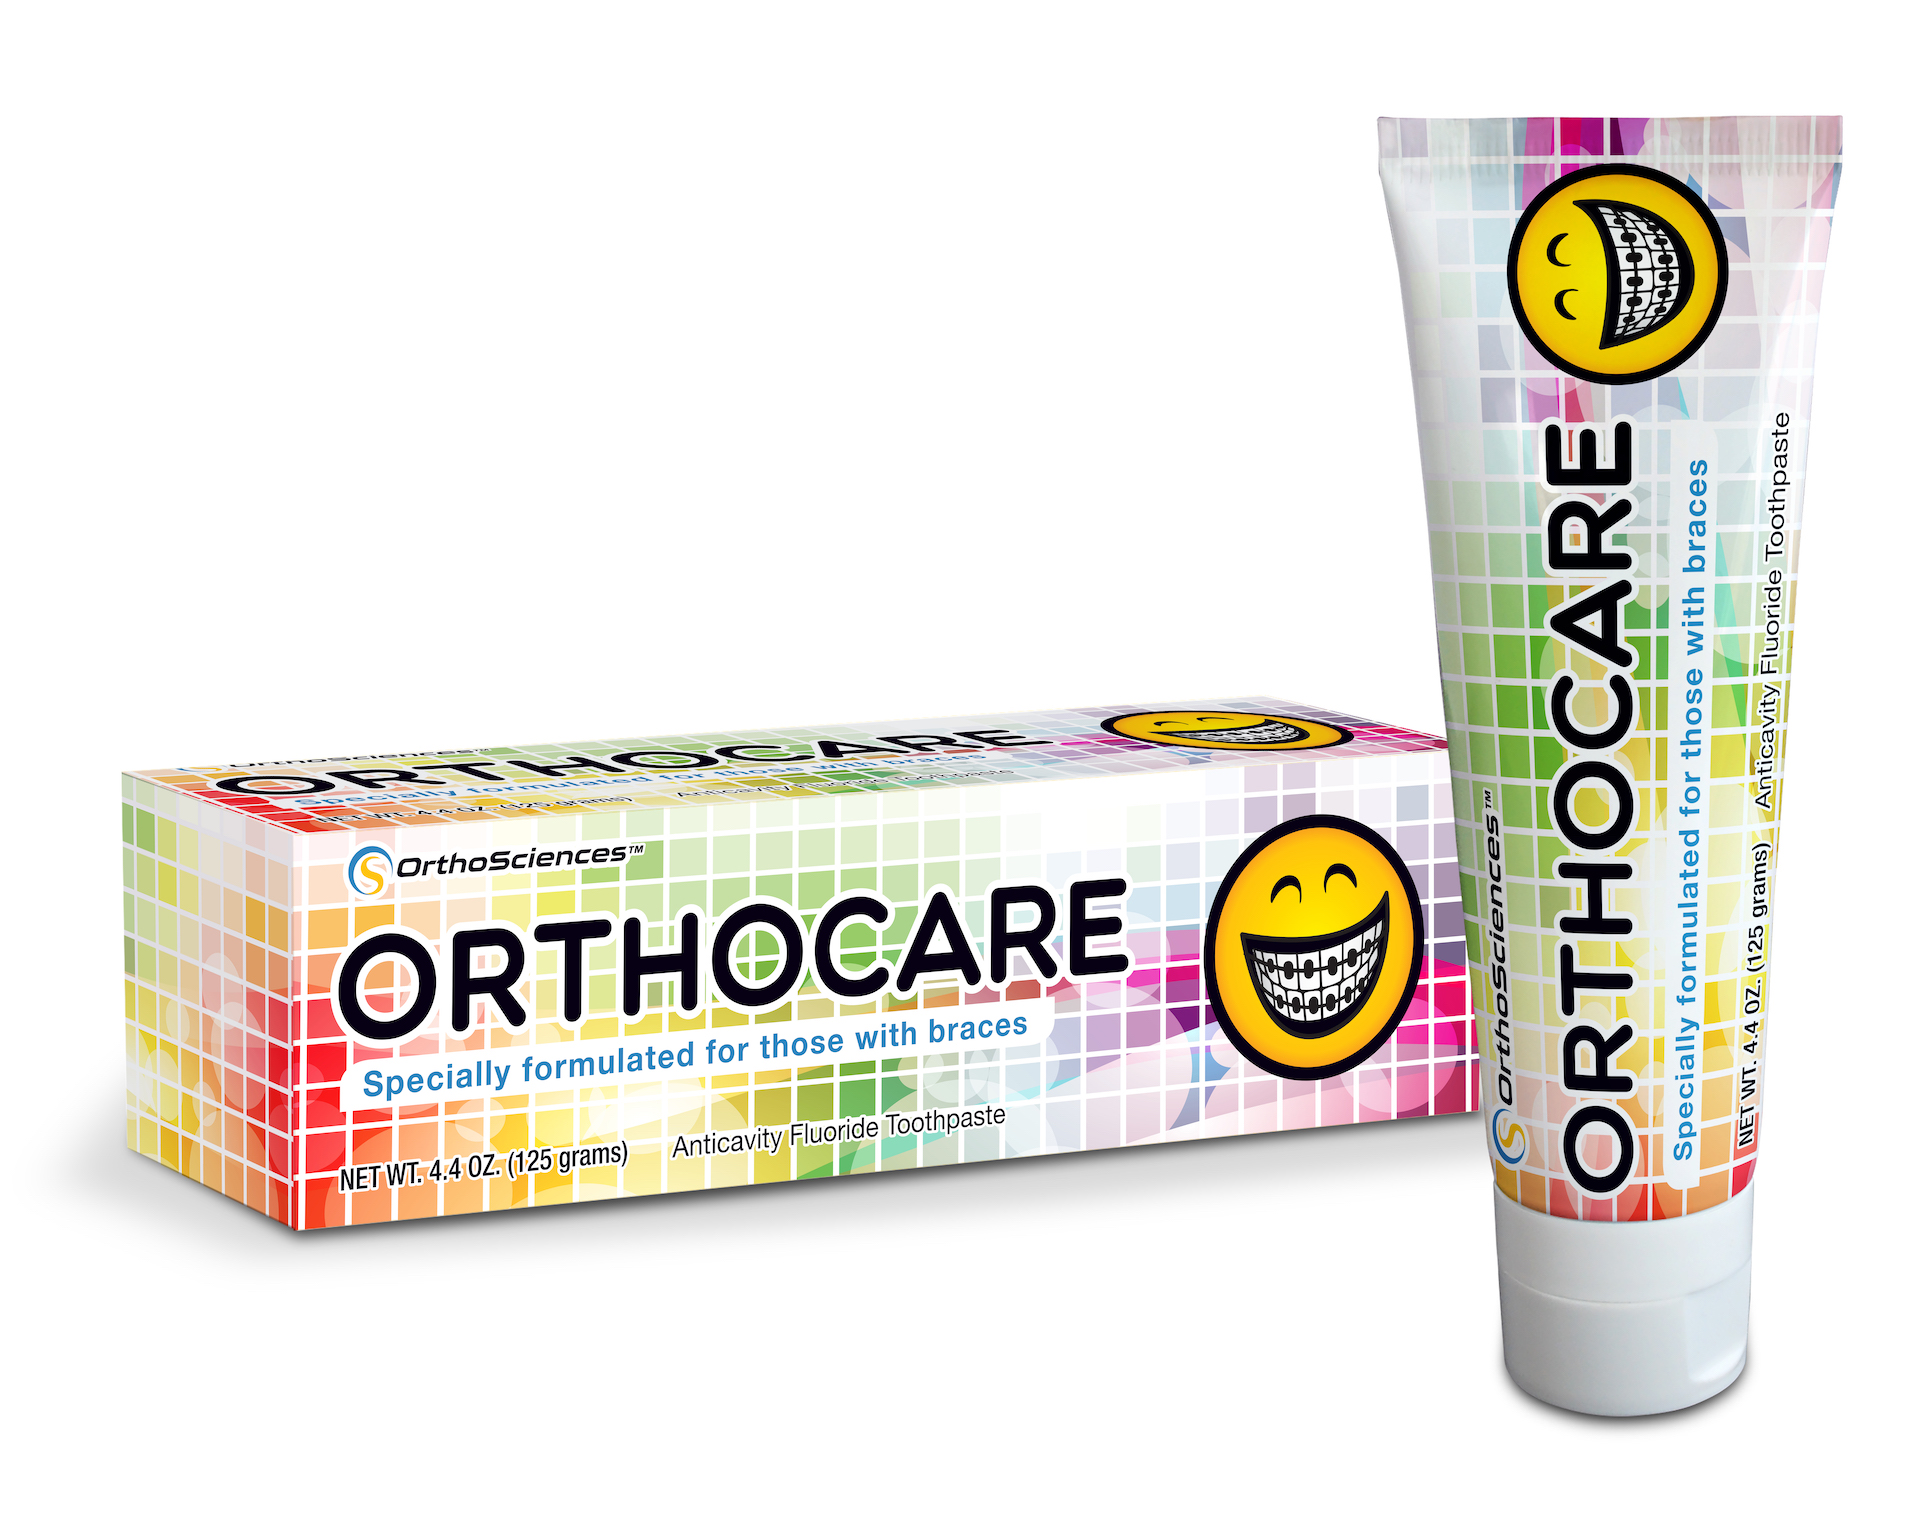 ORTHOCARE Toothpaste - image 1 of 5